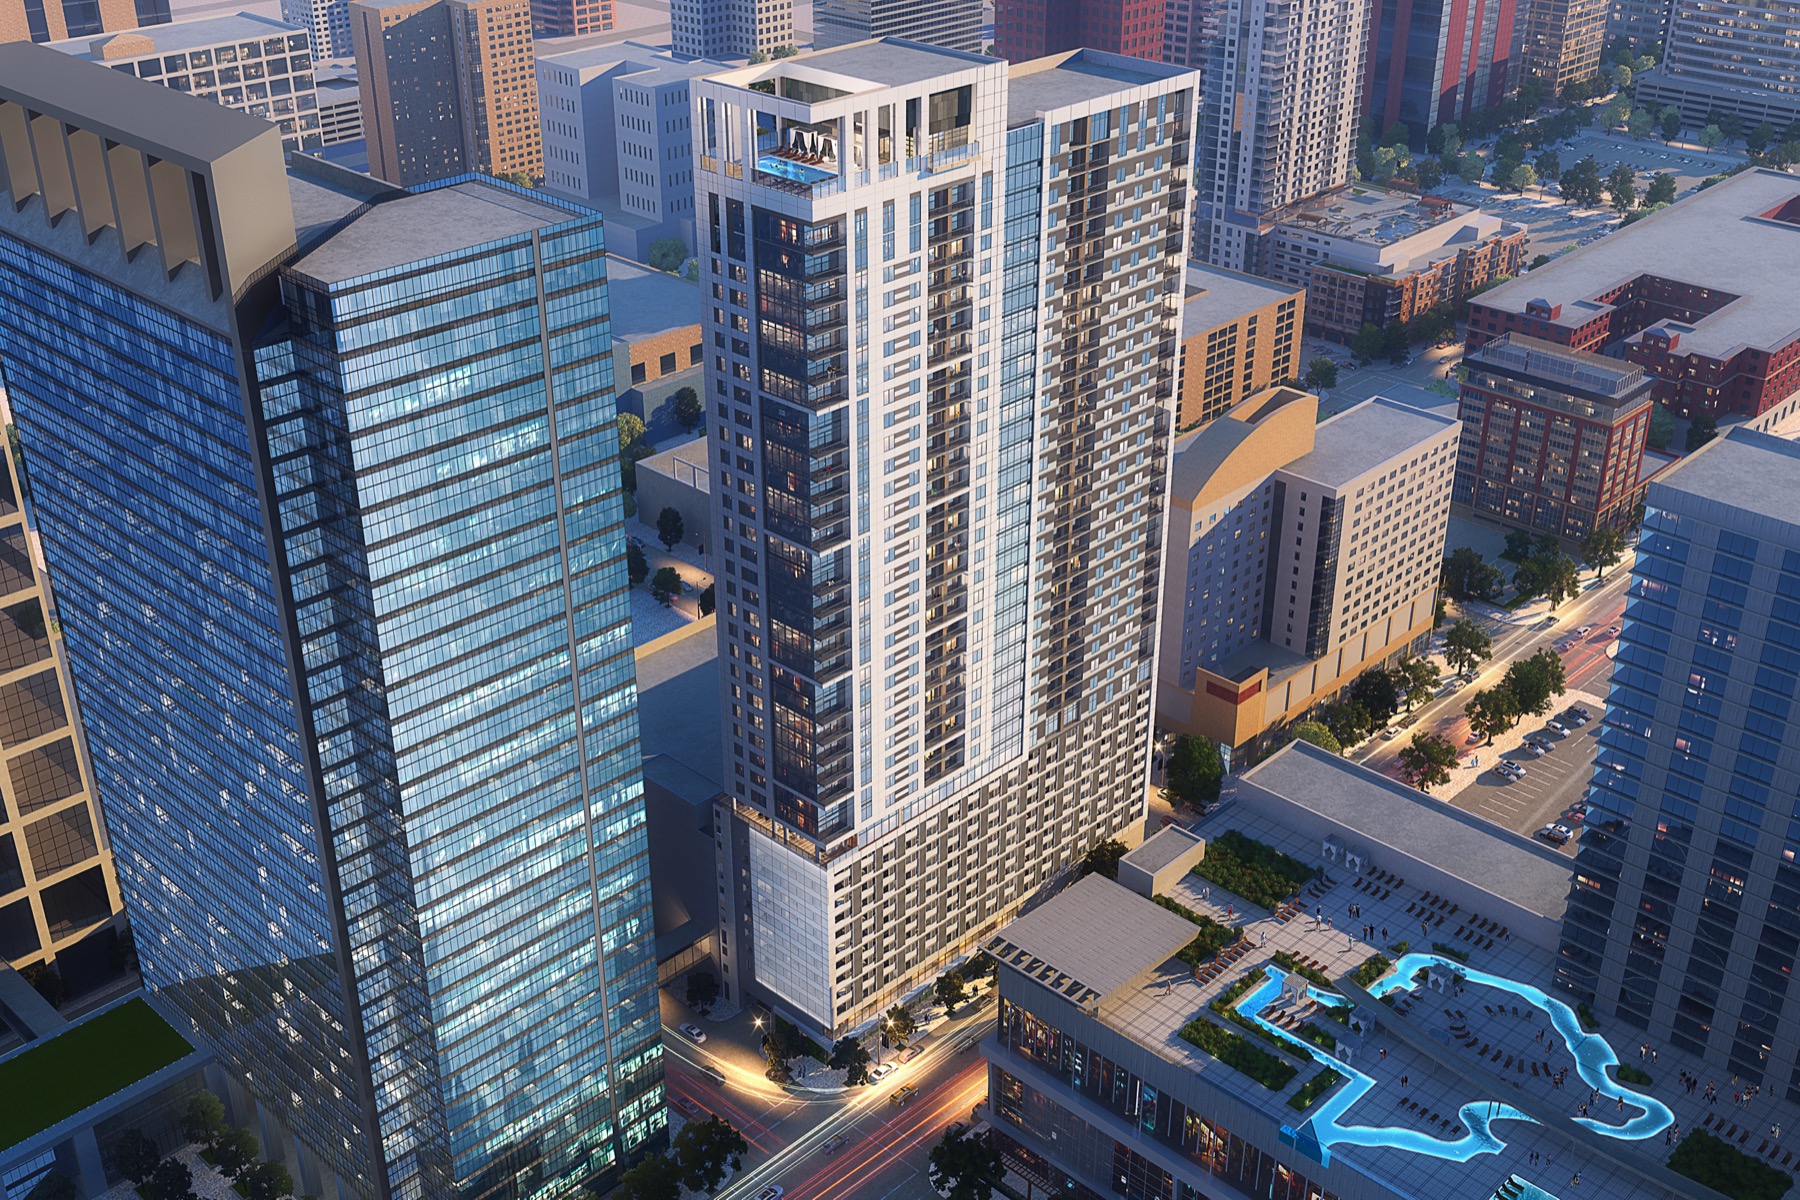 First look at plans for a 43-story luxury tower that will change the Discovery Green area